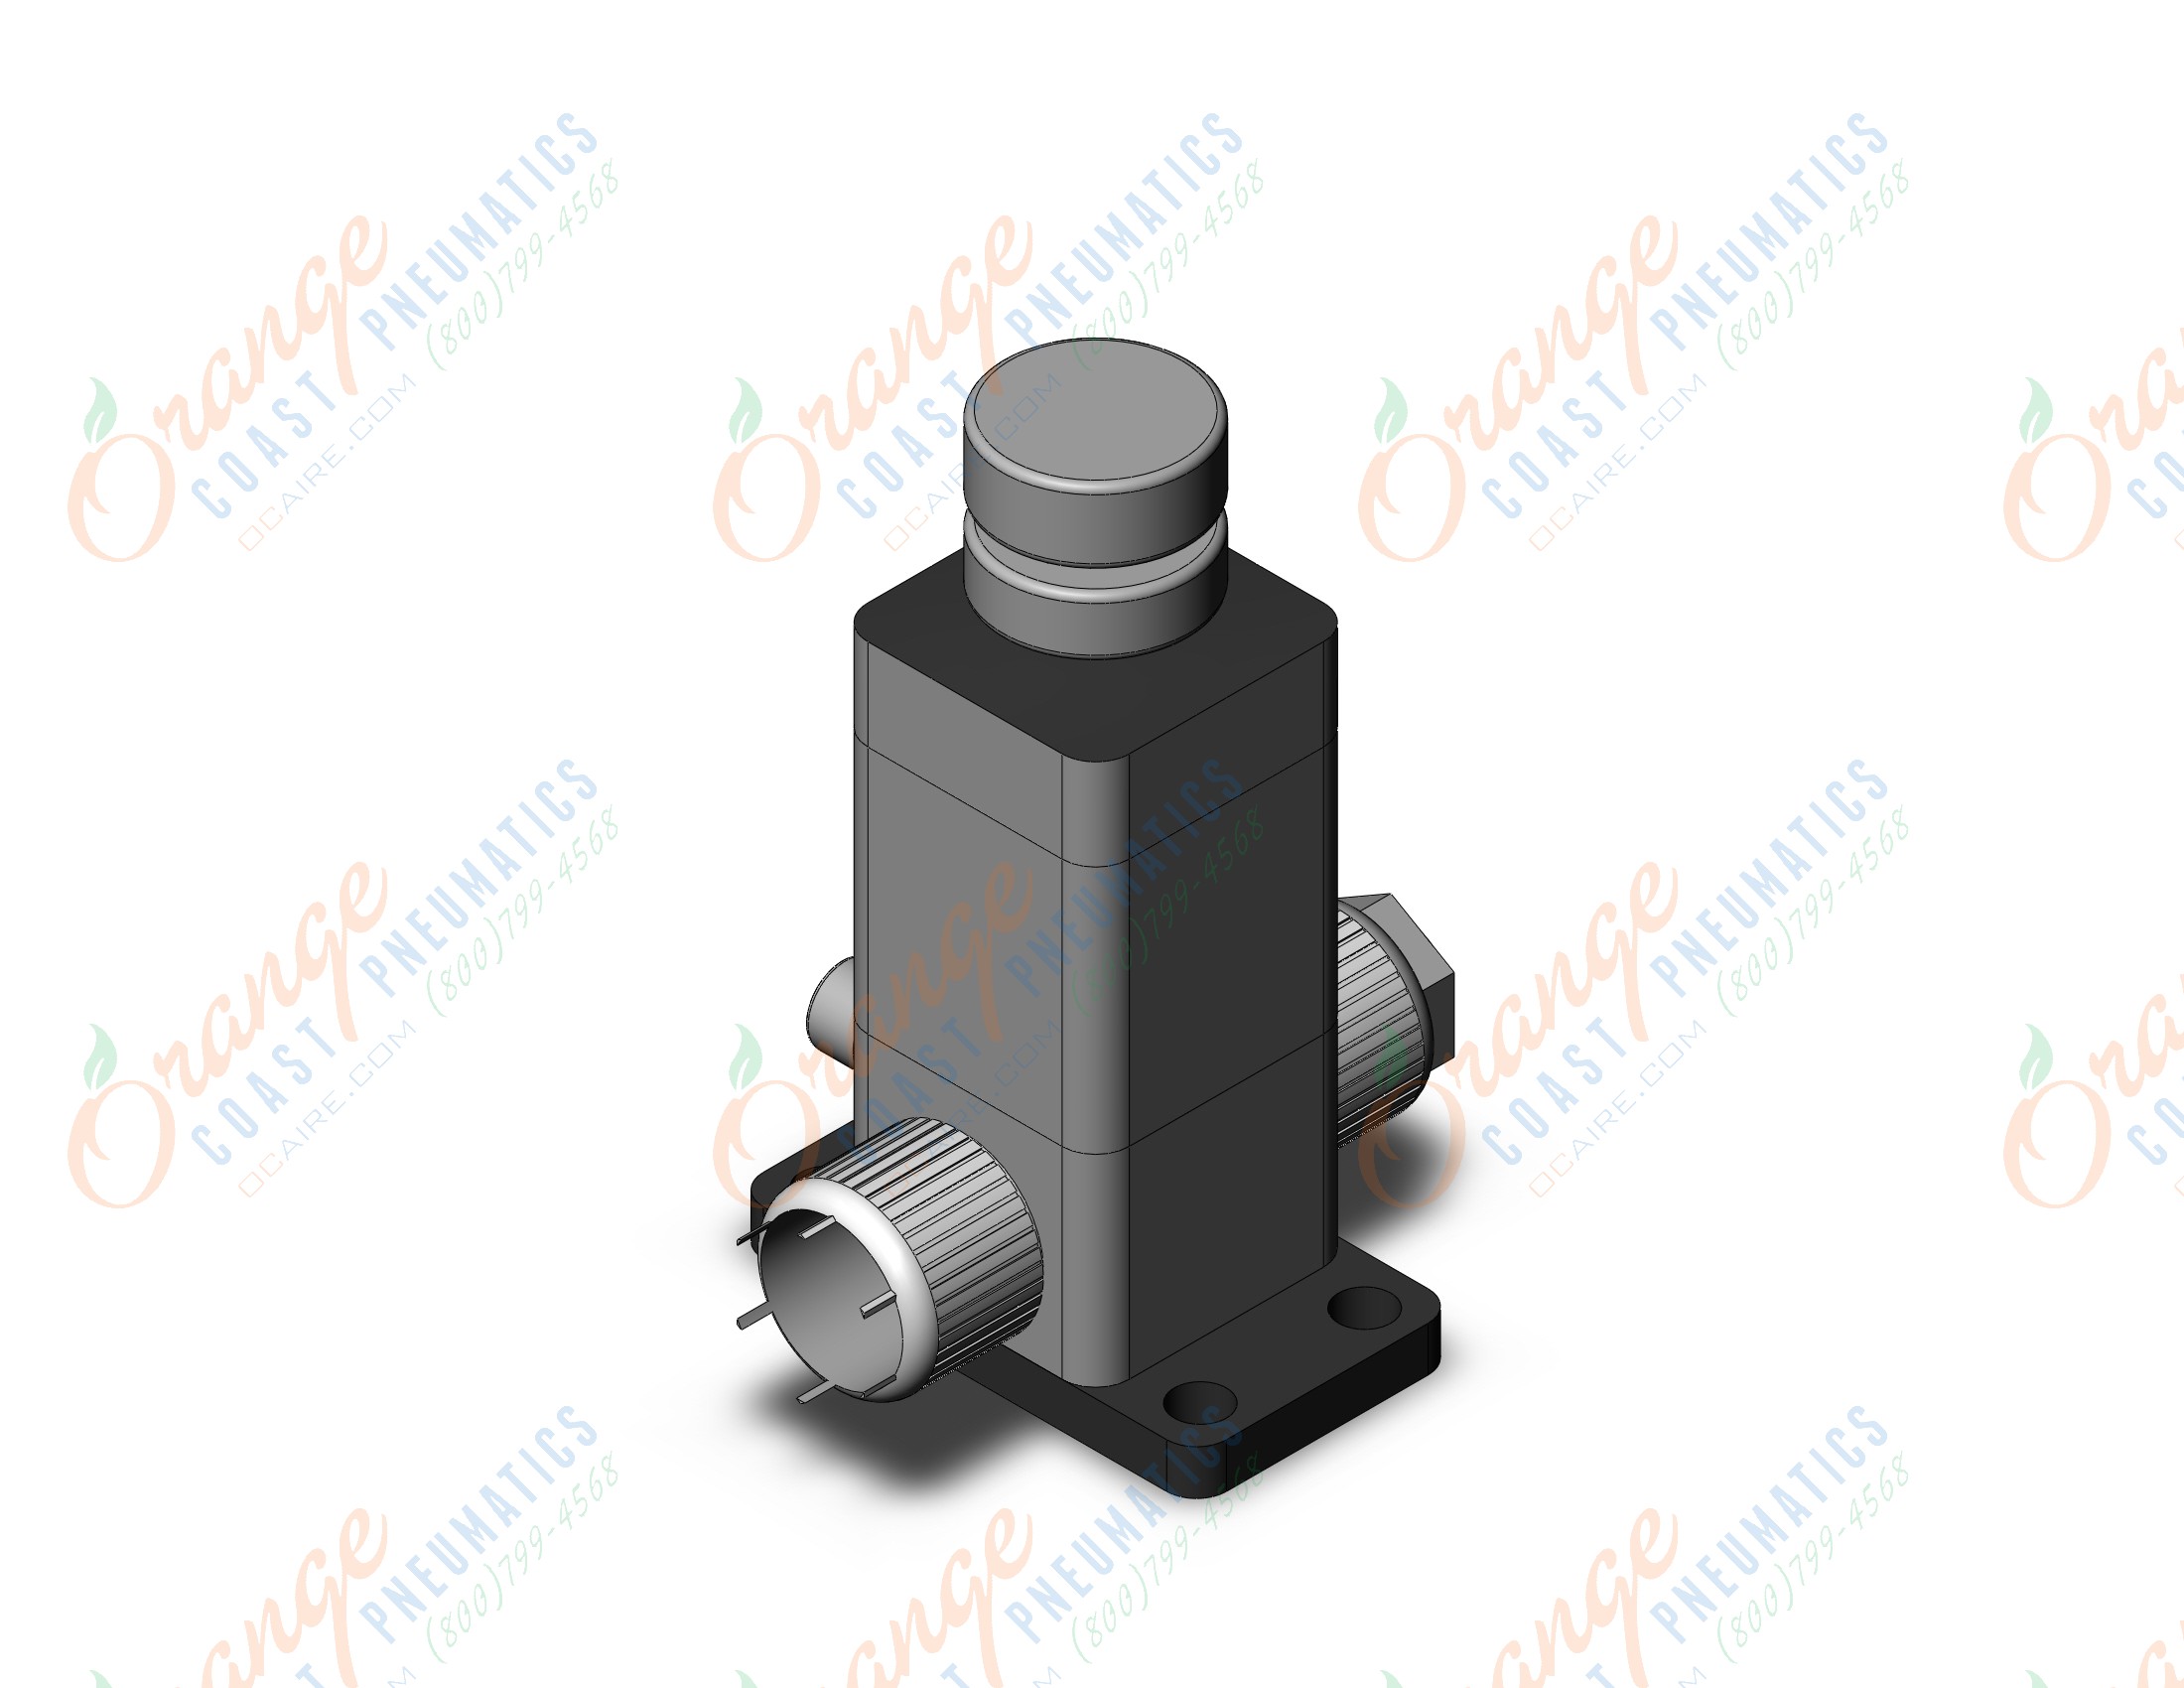 SMC LVD30-S072P3-3 air operated chemical valve, HIGH PURITY CHEMICAL VALVE, AIR OPERATED